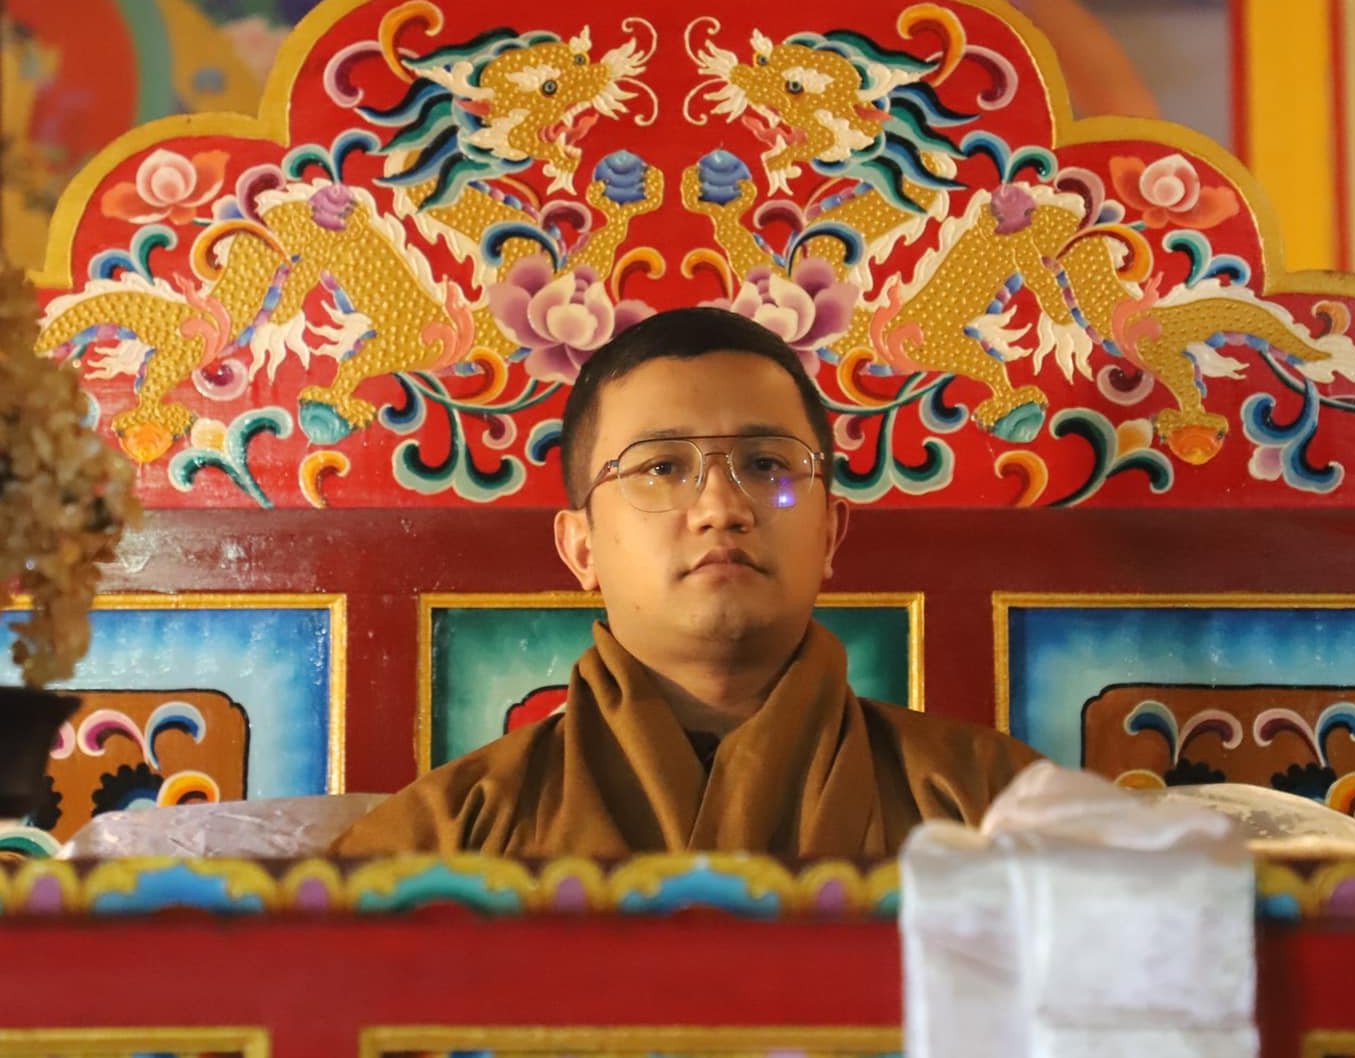 Announcement of april teachings "General Introduction to the Drukpa Kagyu Lineage and the Six Yogas of Naropa"